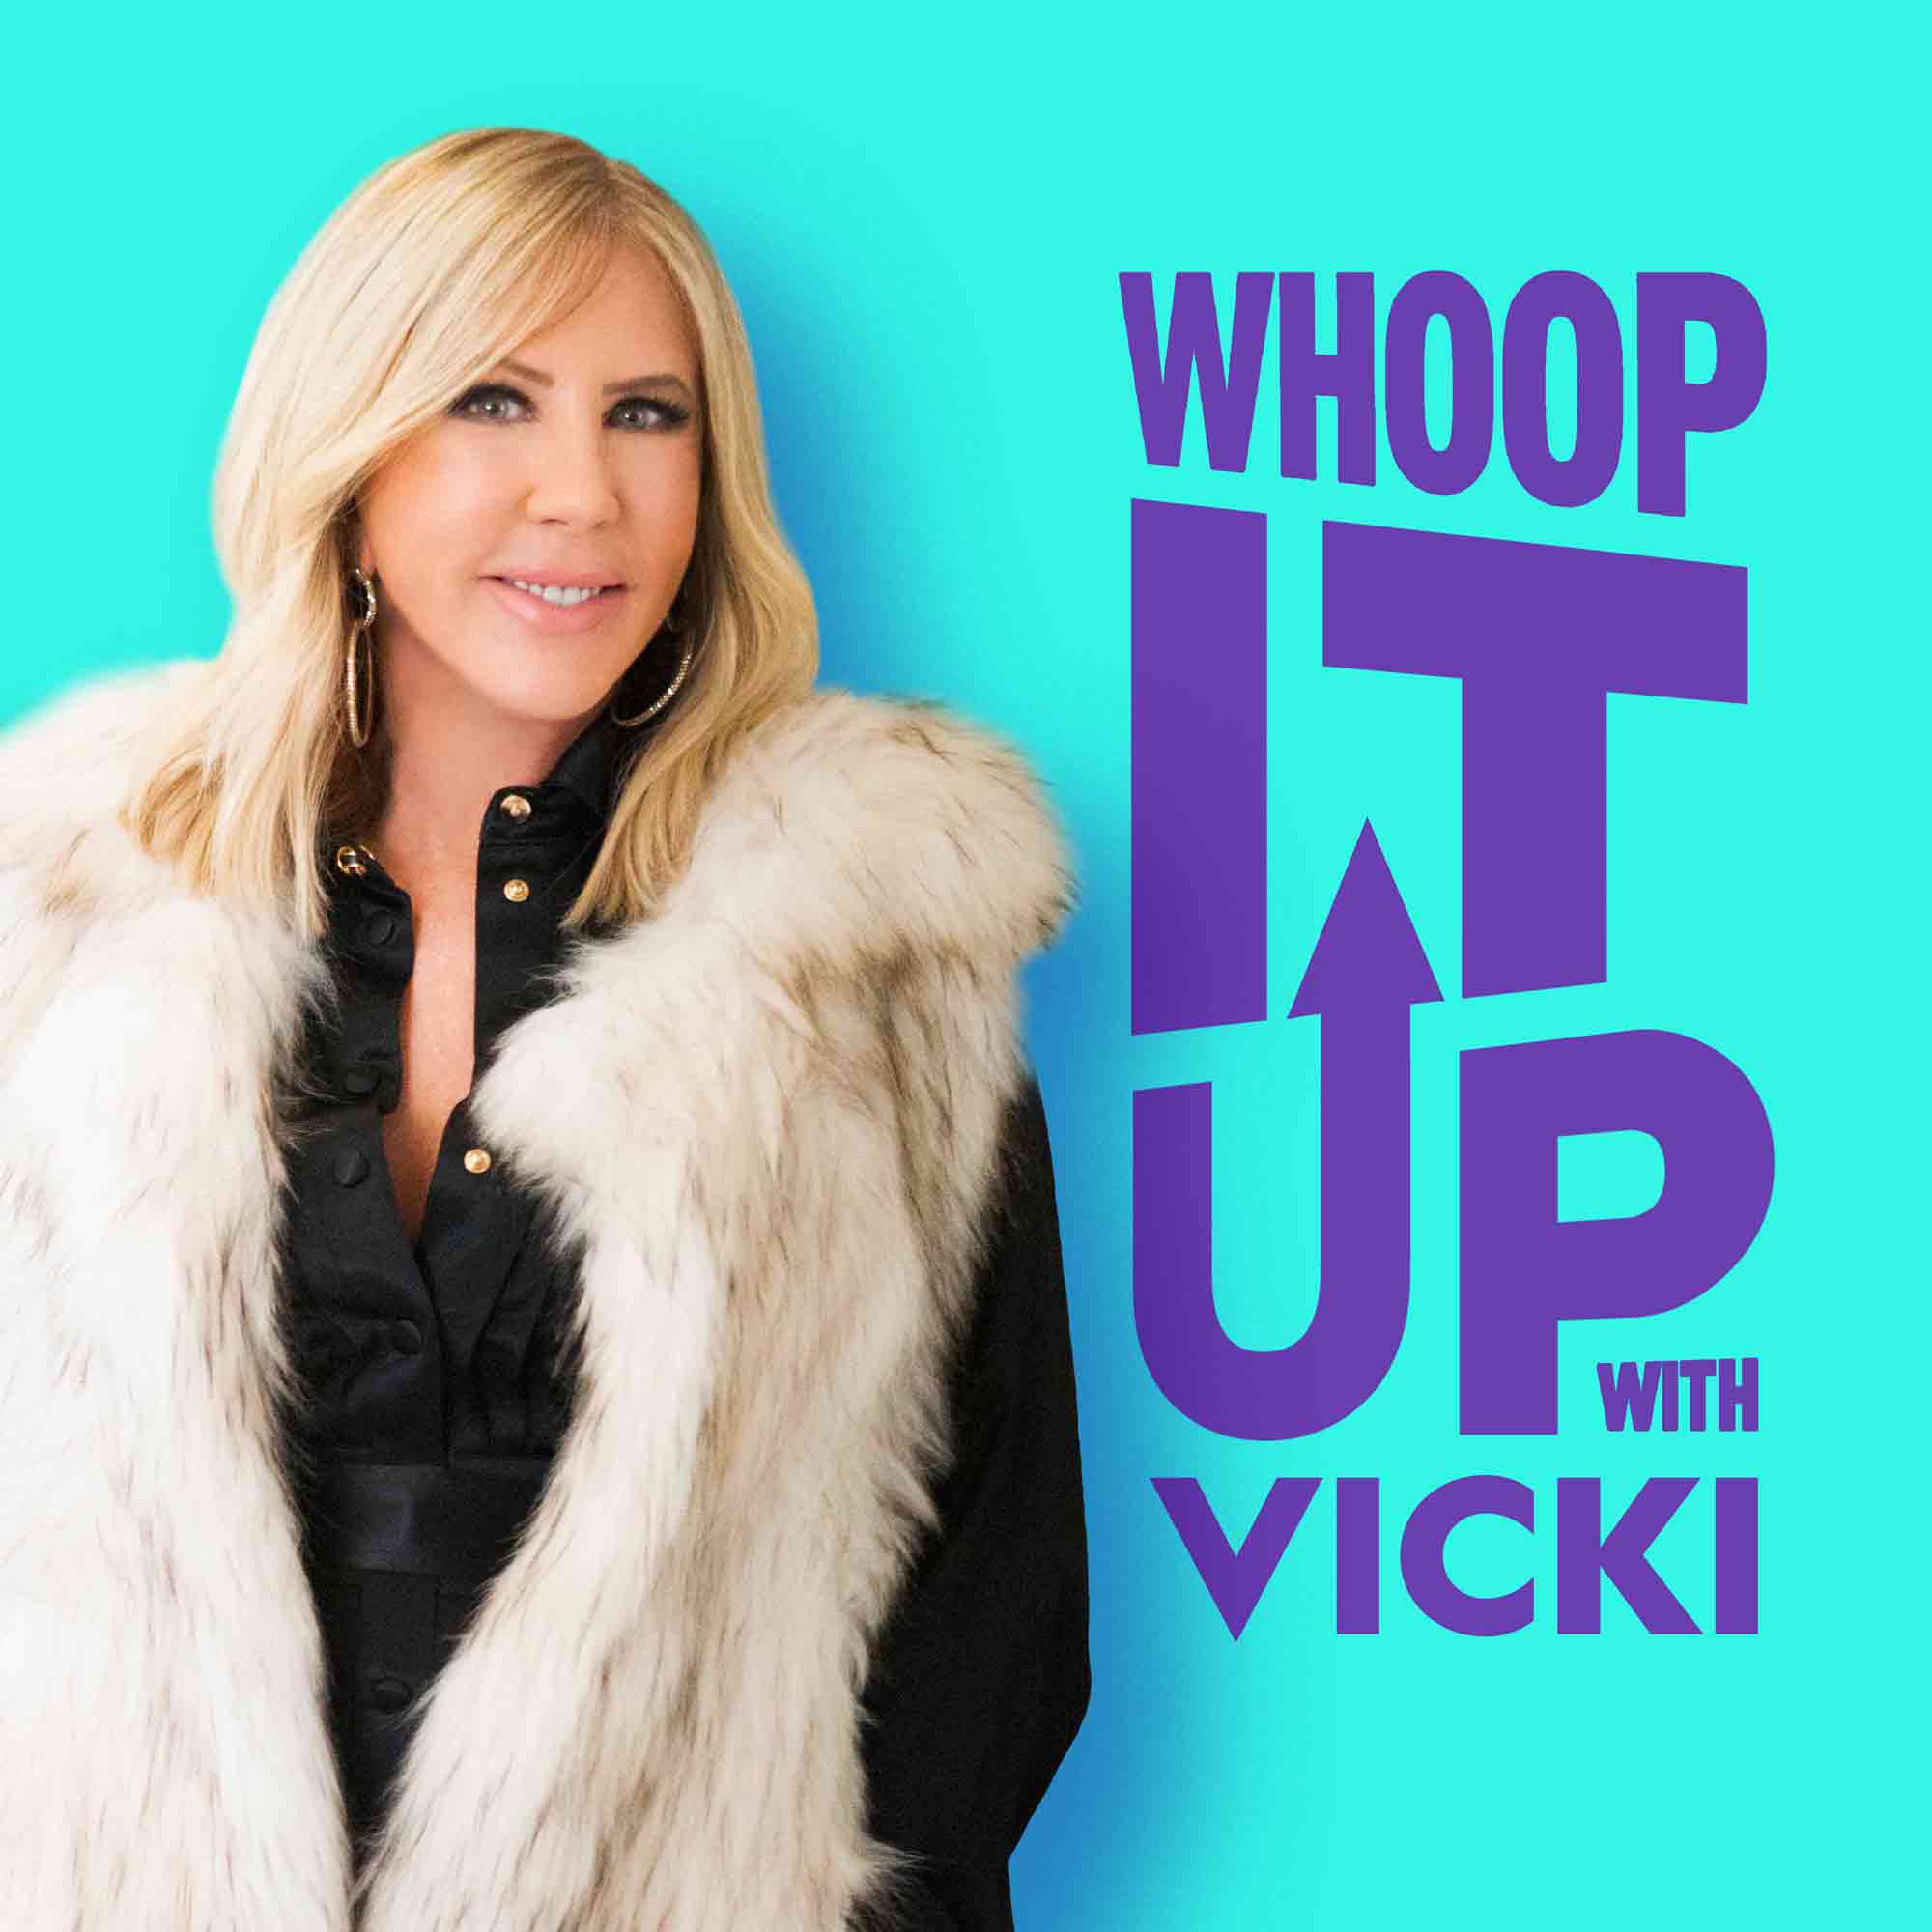 NEW PODCAST FROM REAL HOUSEWIVES OF O.C. PIONEER VICKI GUNVALSON LAUNCHES TODAY ON WESTWOOD ONE